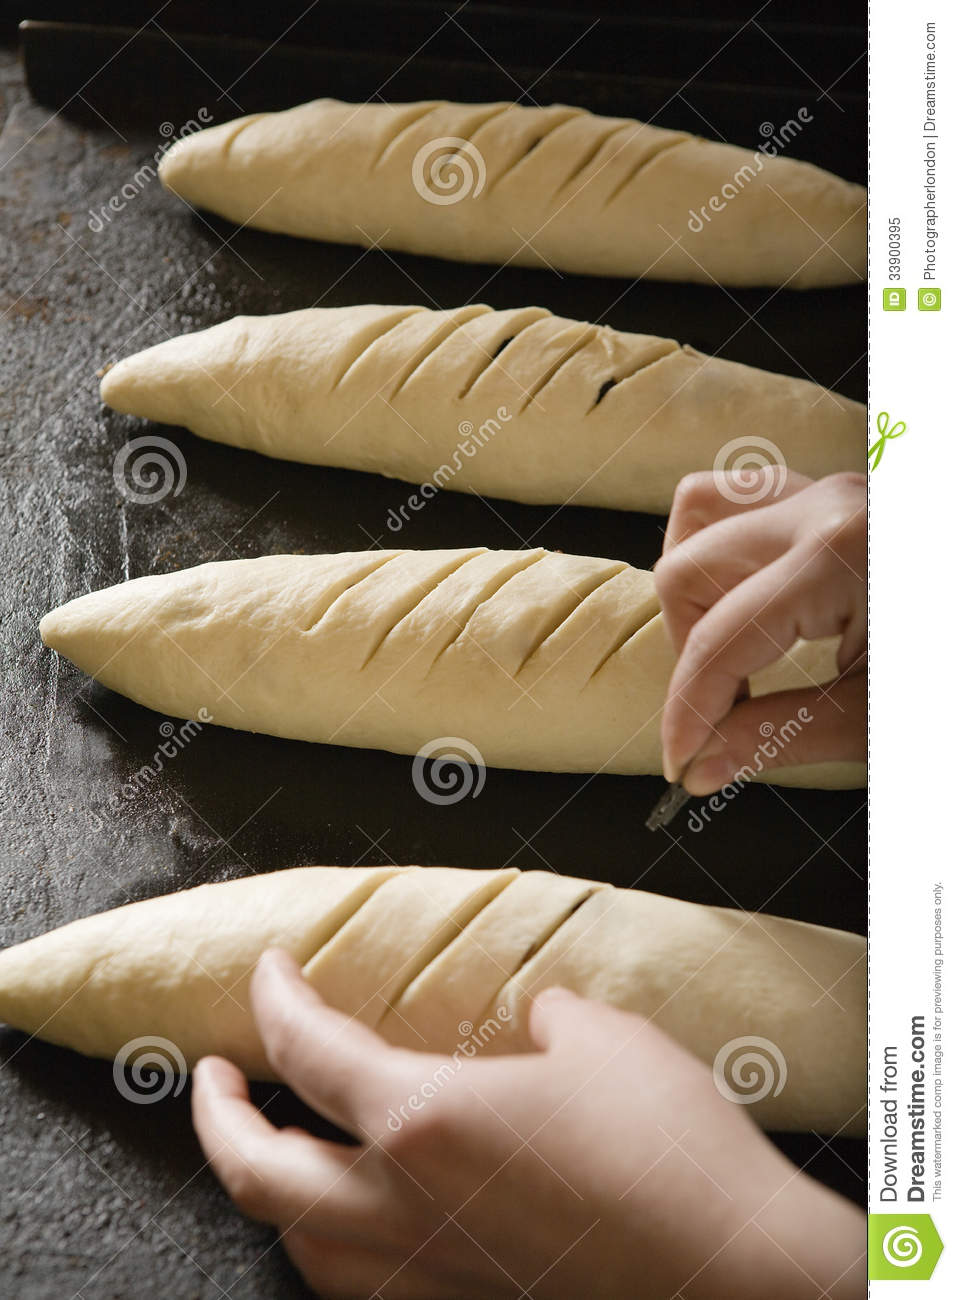 Baker Scoring Loaves Of Bread Dough Royalty Free Stock Photo   Image    